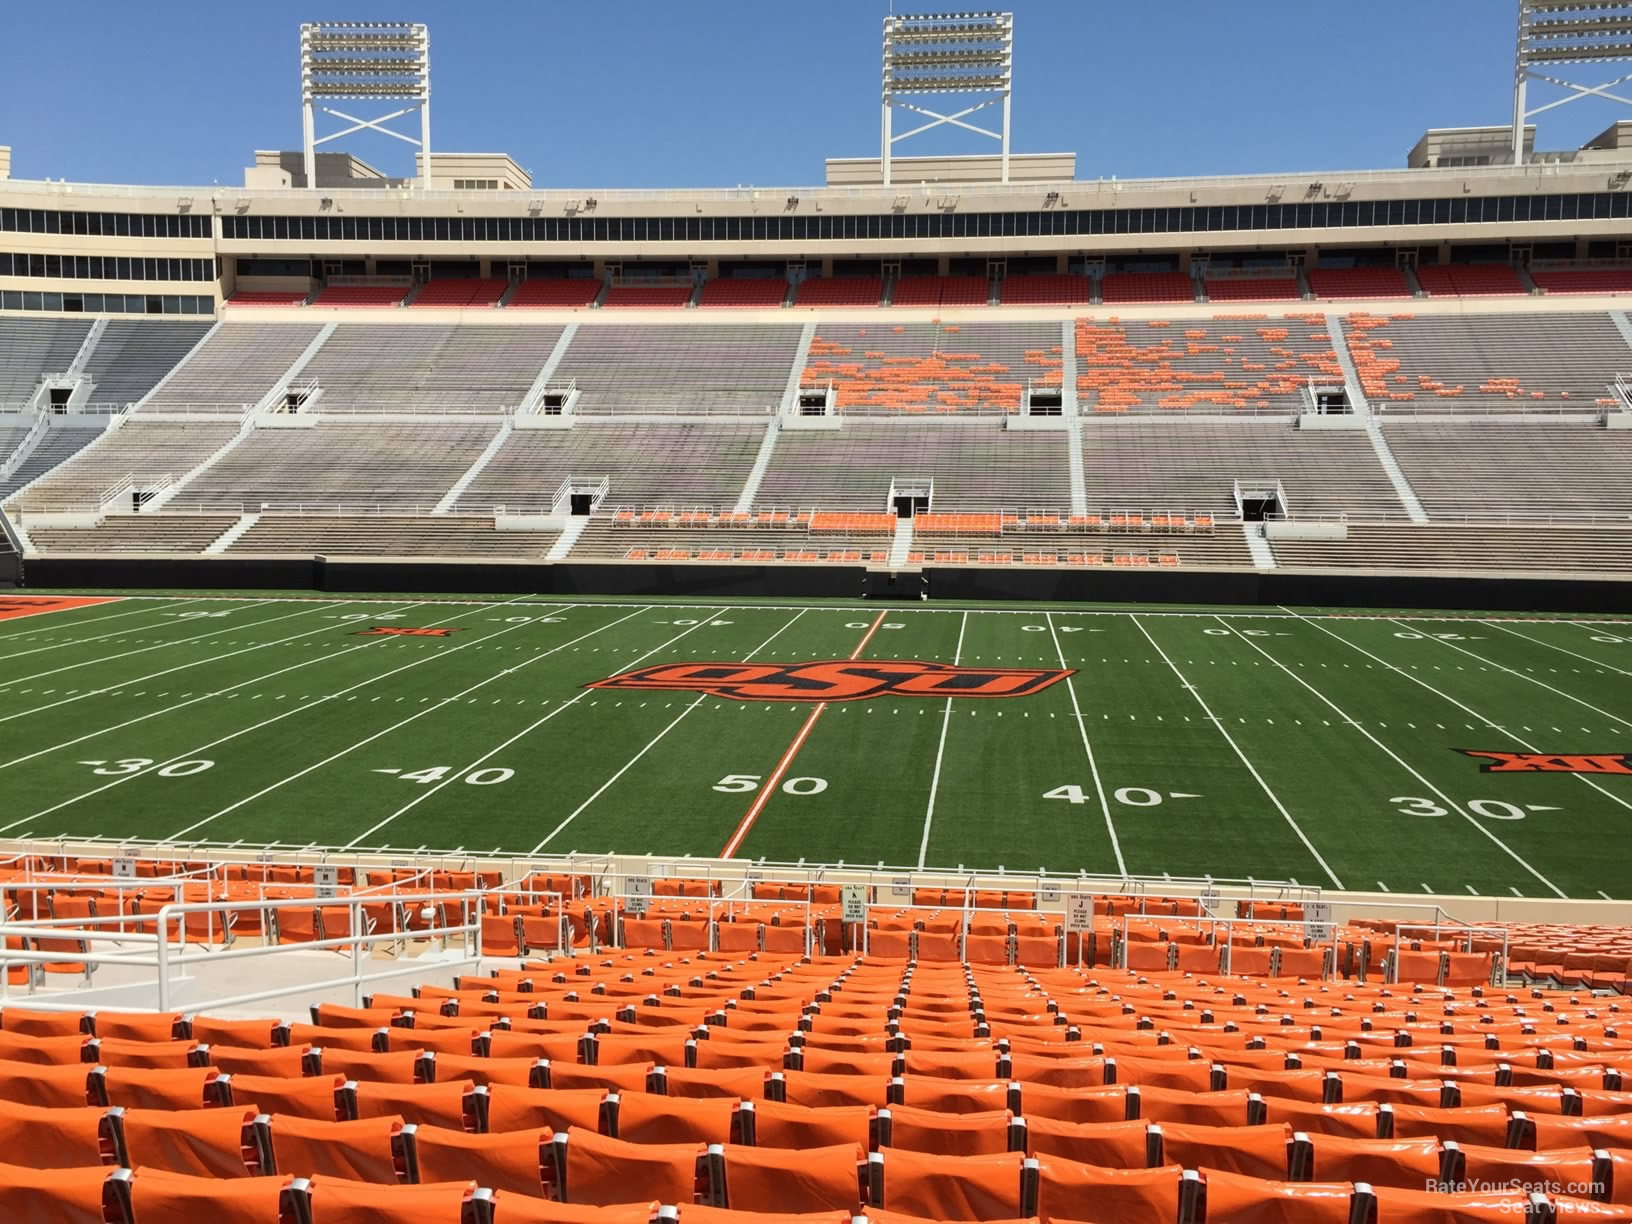 section 205, row 20 seat view  - boone pickens stadium